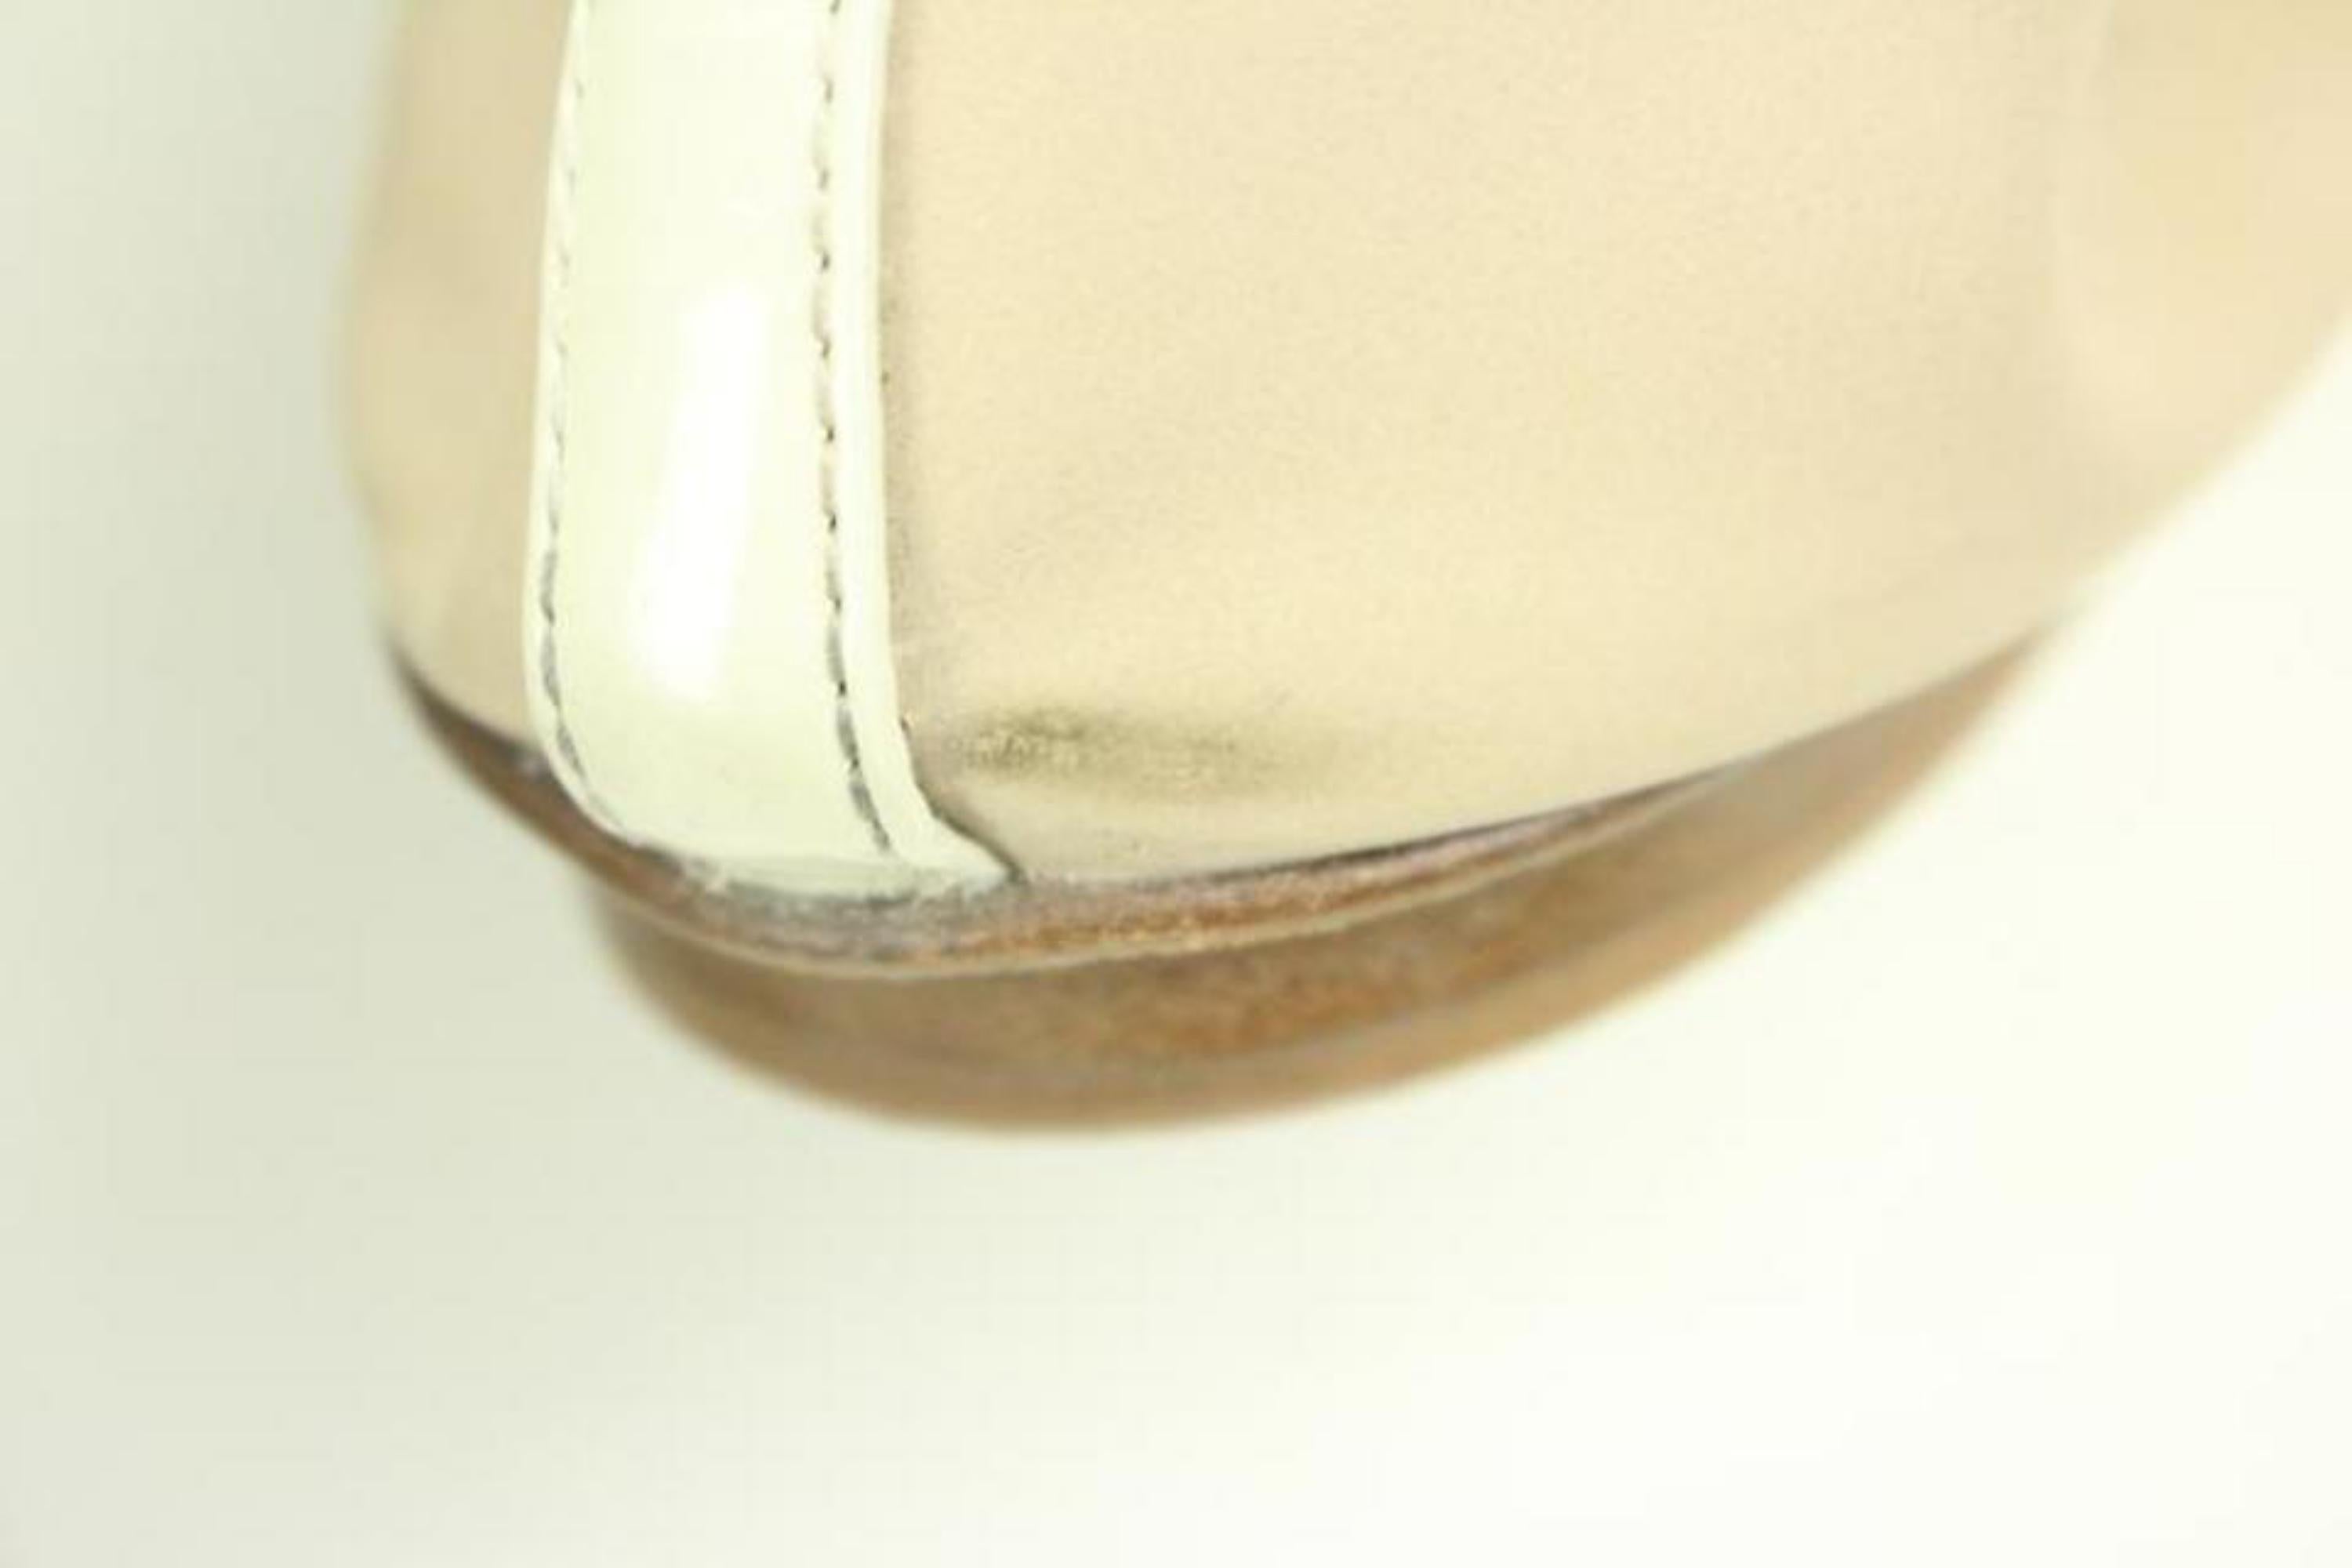 Chanel Beige Ballerines Lbslm64 Flats In Fair Condition For Sale In Forest Hills, NY